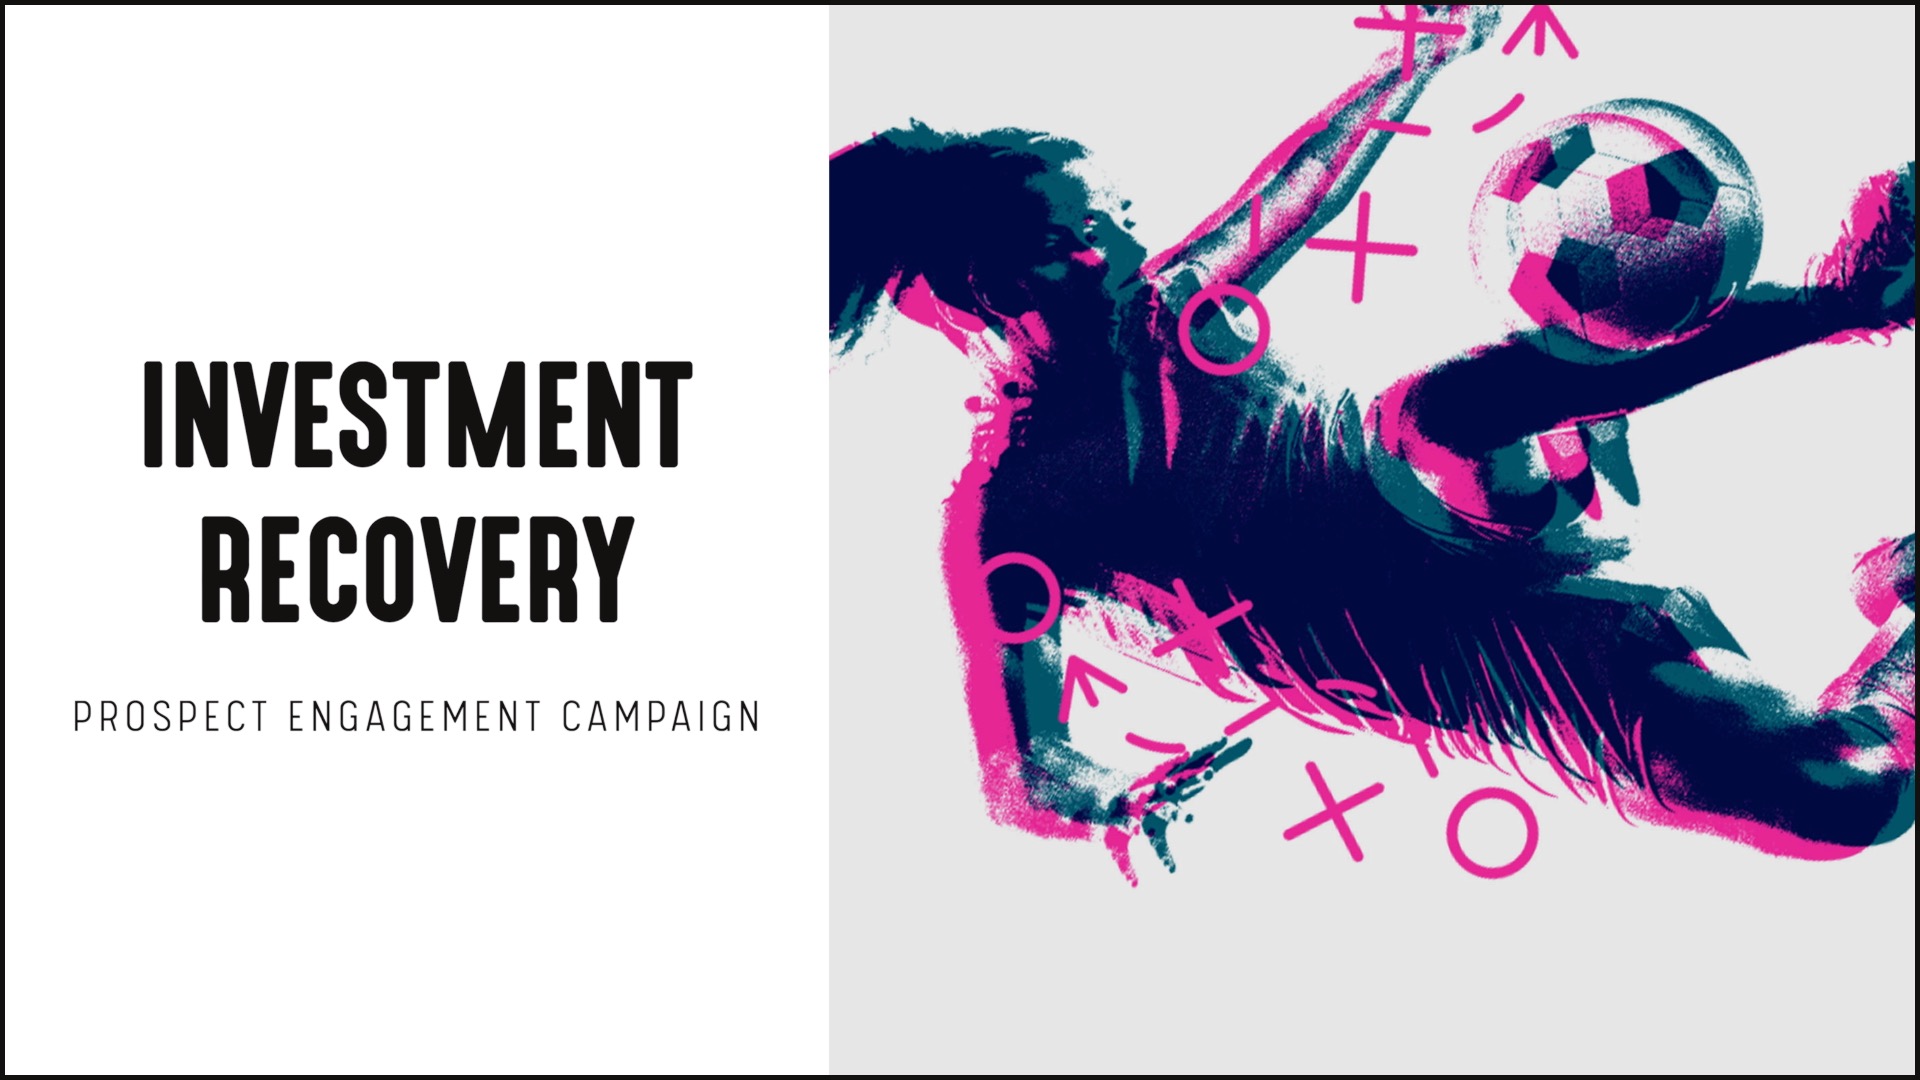 [NEW] Investment Recovery - Prospect Engagement Campaign for Financial Advisors